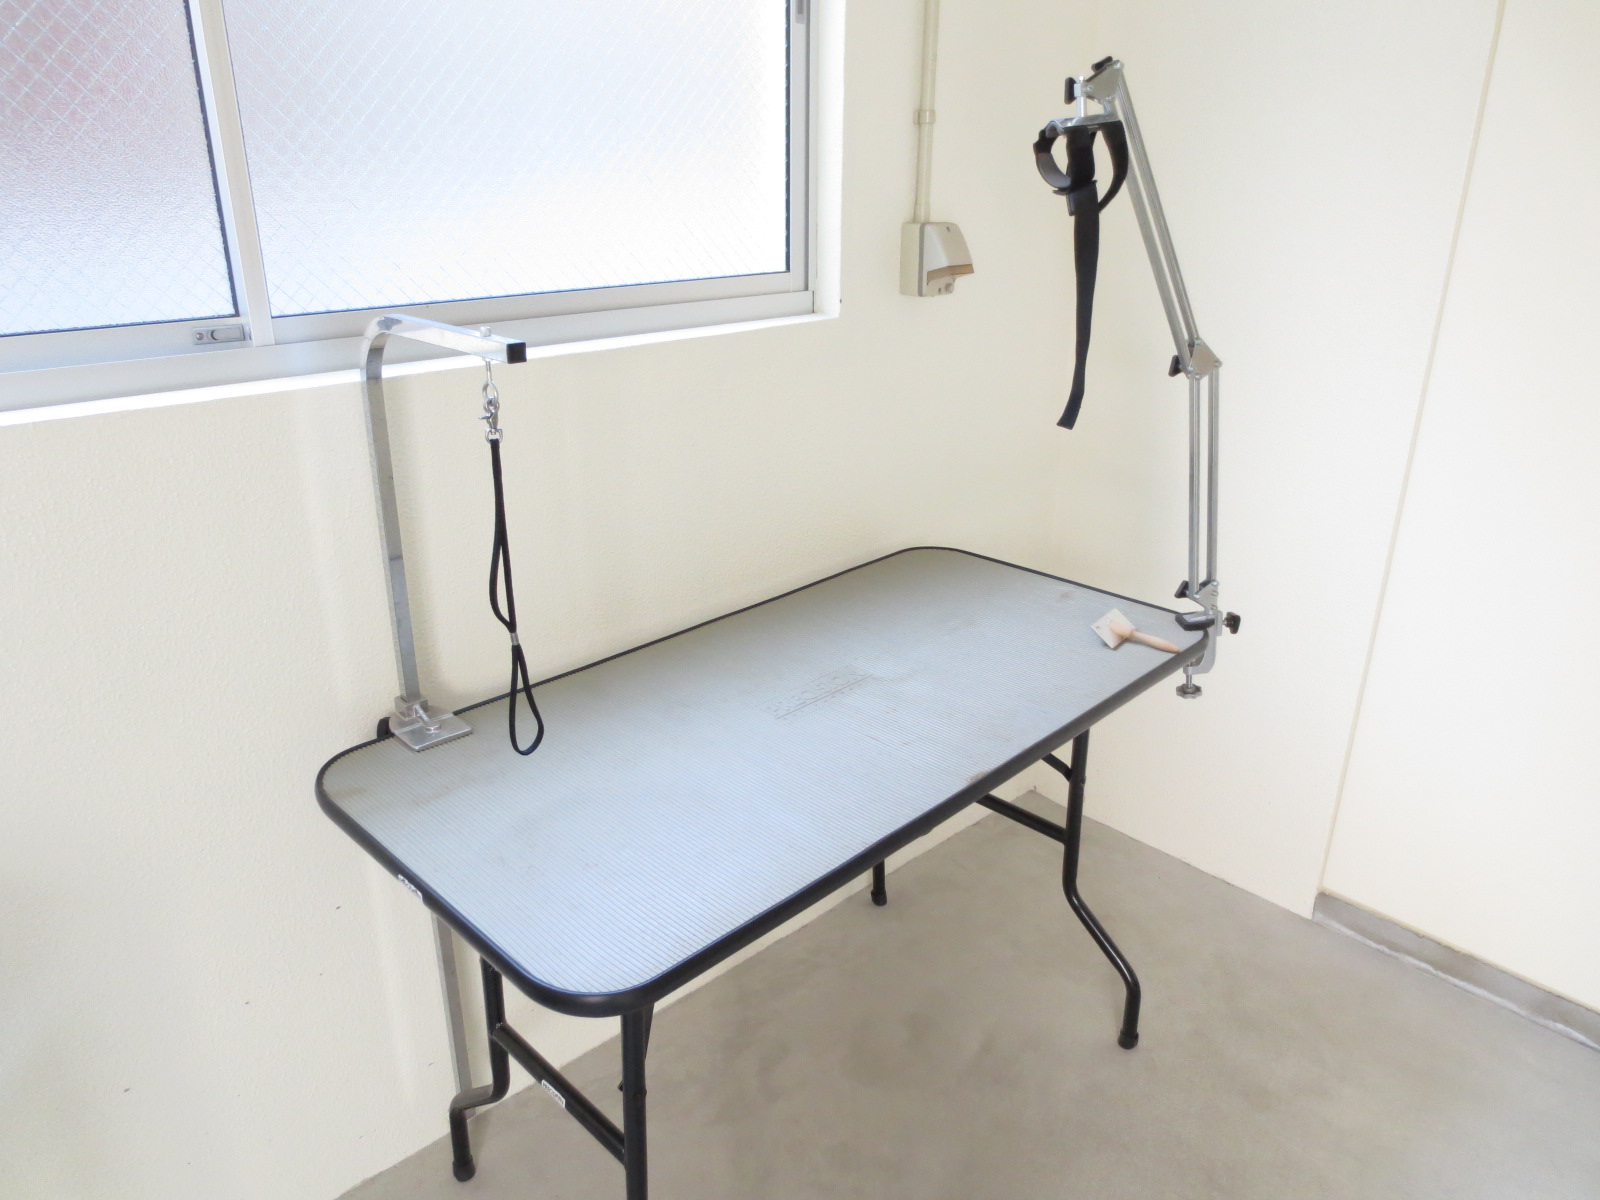 Other common areas. Grooming table